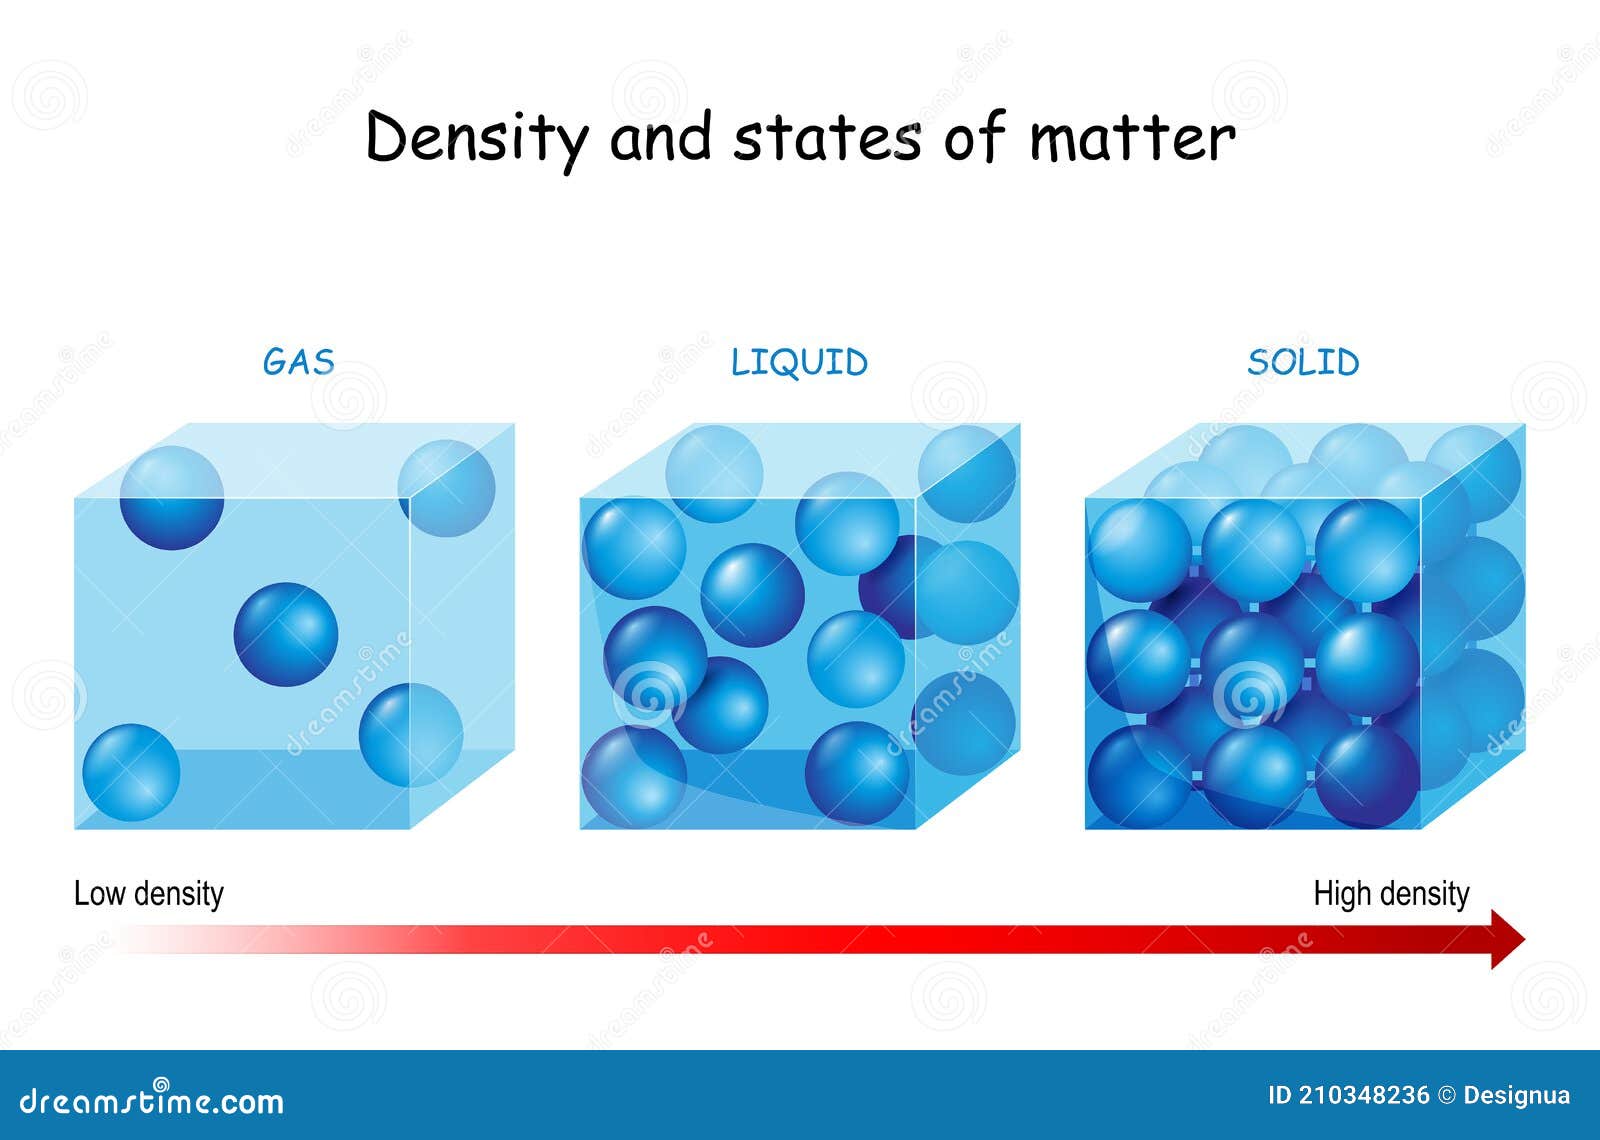 density and states of matter